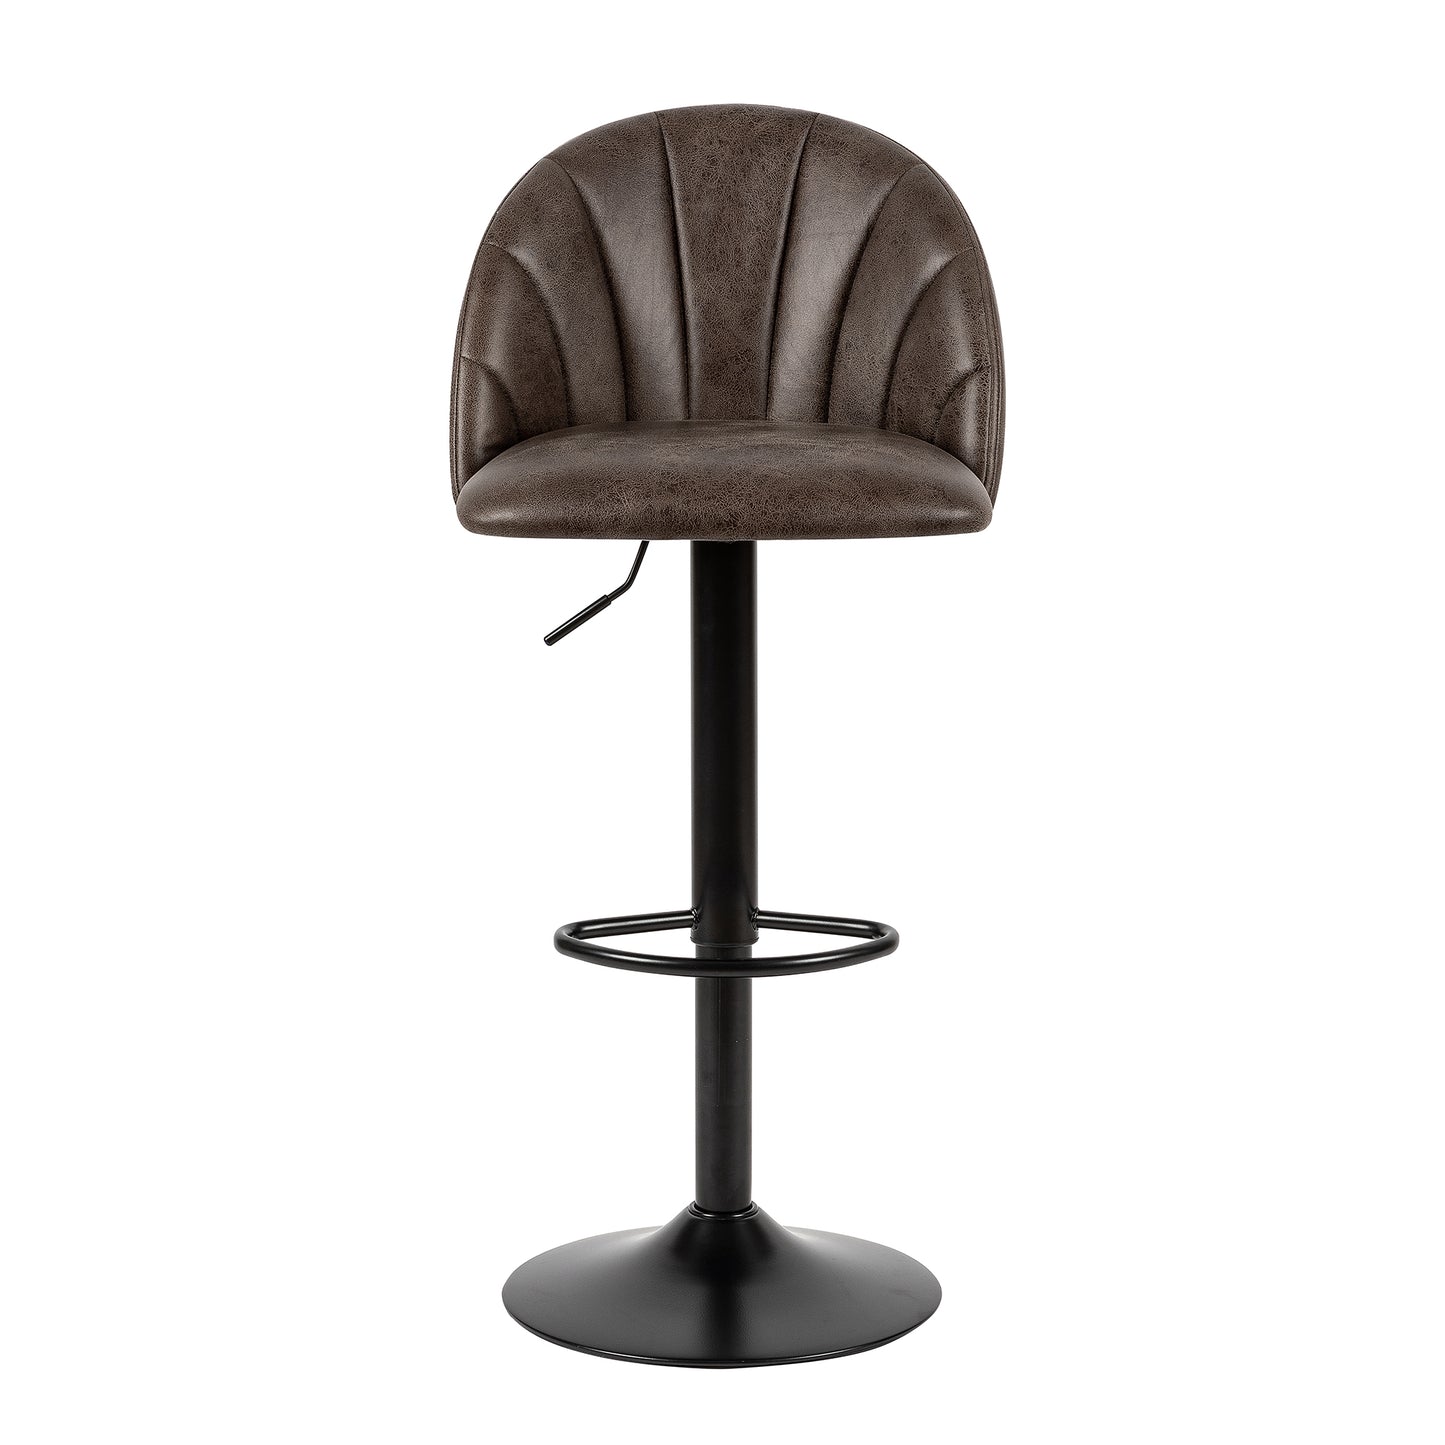 GIA Air Leather Swivel Bar Stools, Brown,2 pack